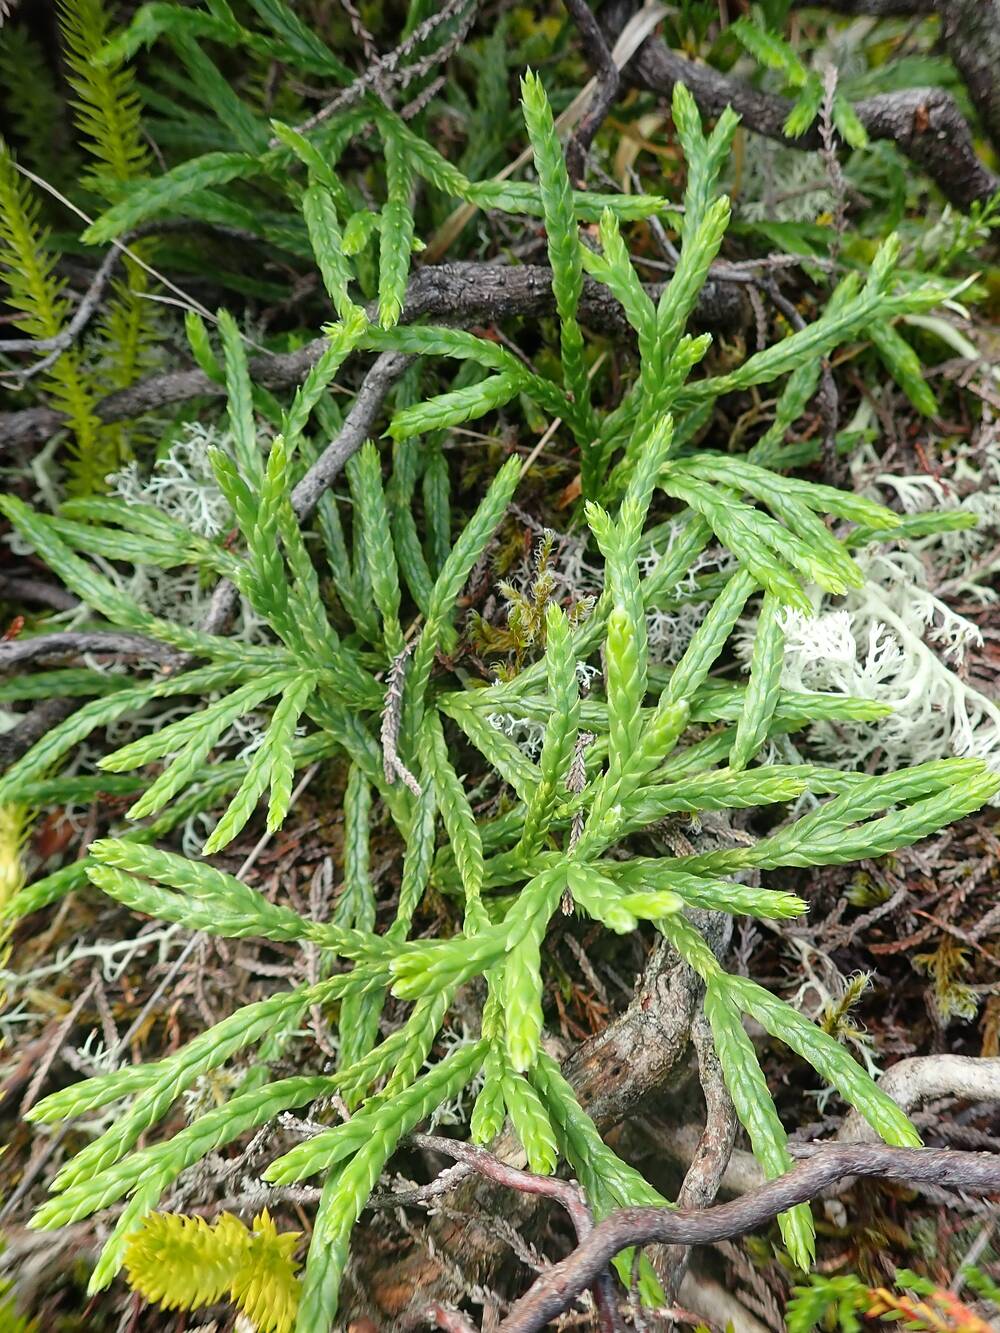 A close-up view of a clubmoss plant. Its bright green fronds spread across the ground, among twigs and ferns.